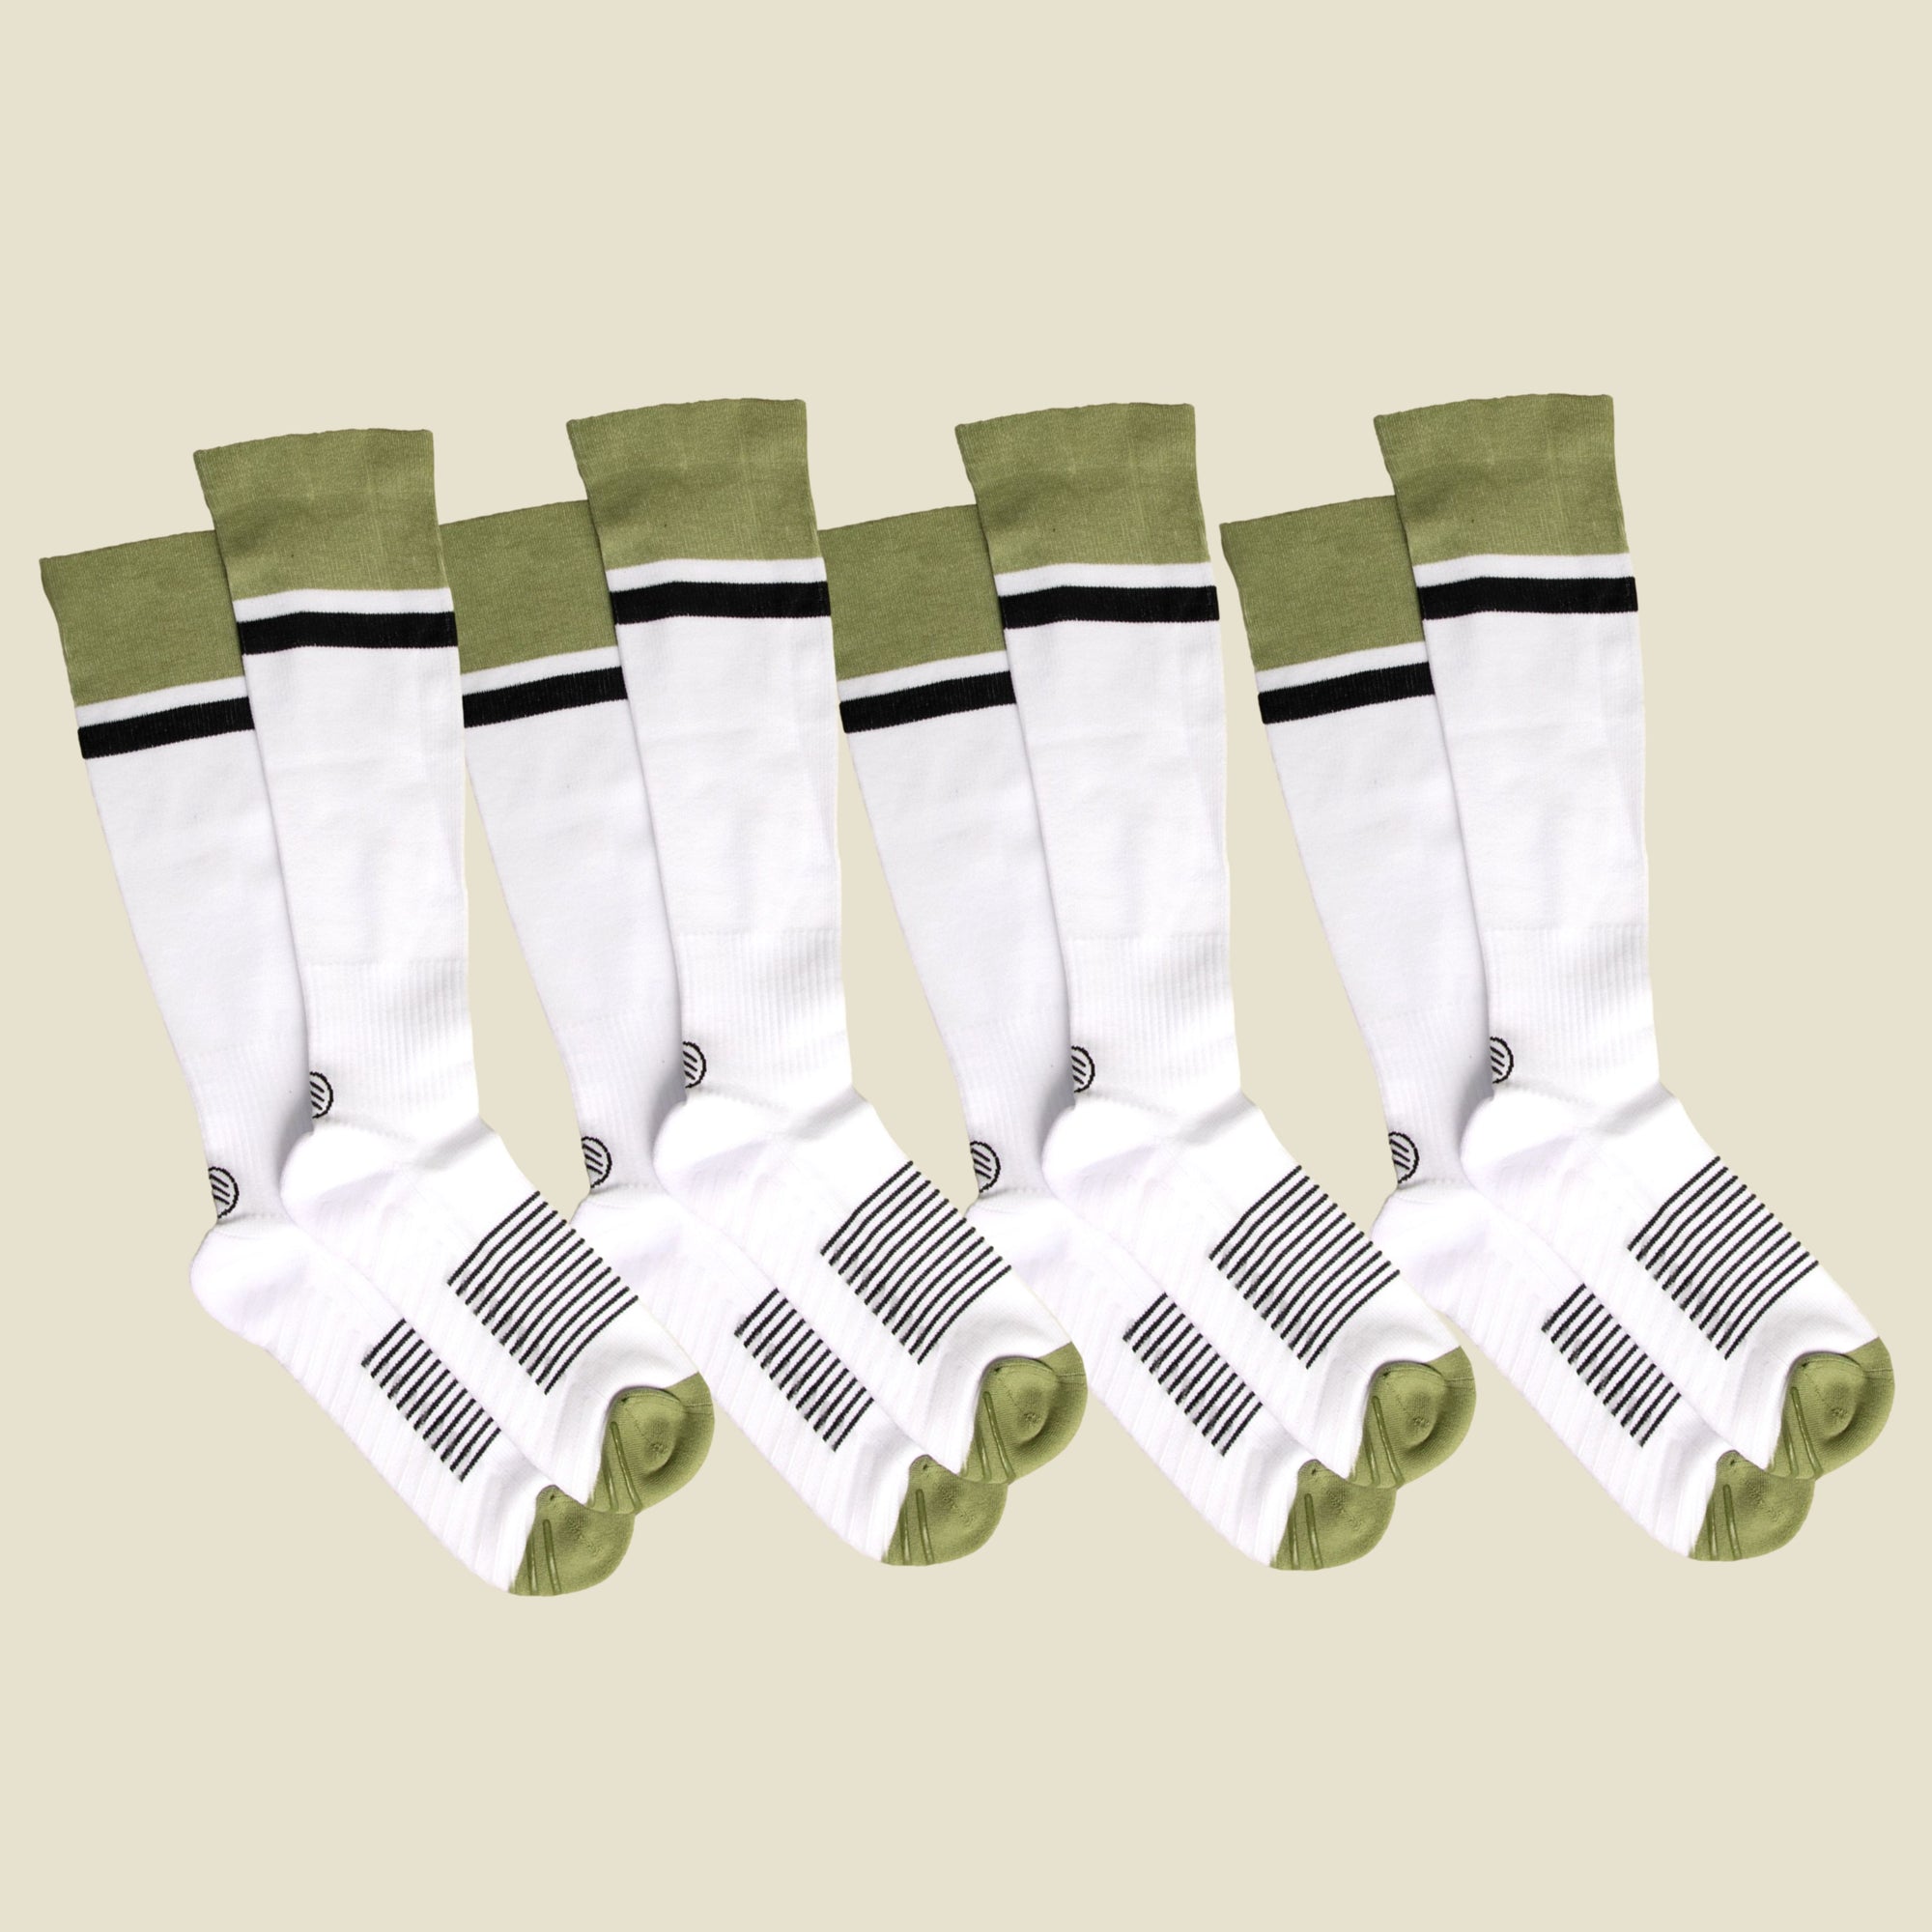 Women's White/Black/Green Compression Socks with Grips - 4 Pairs - Gripjoy Socks